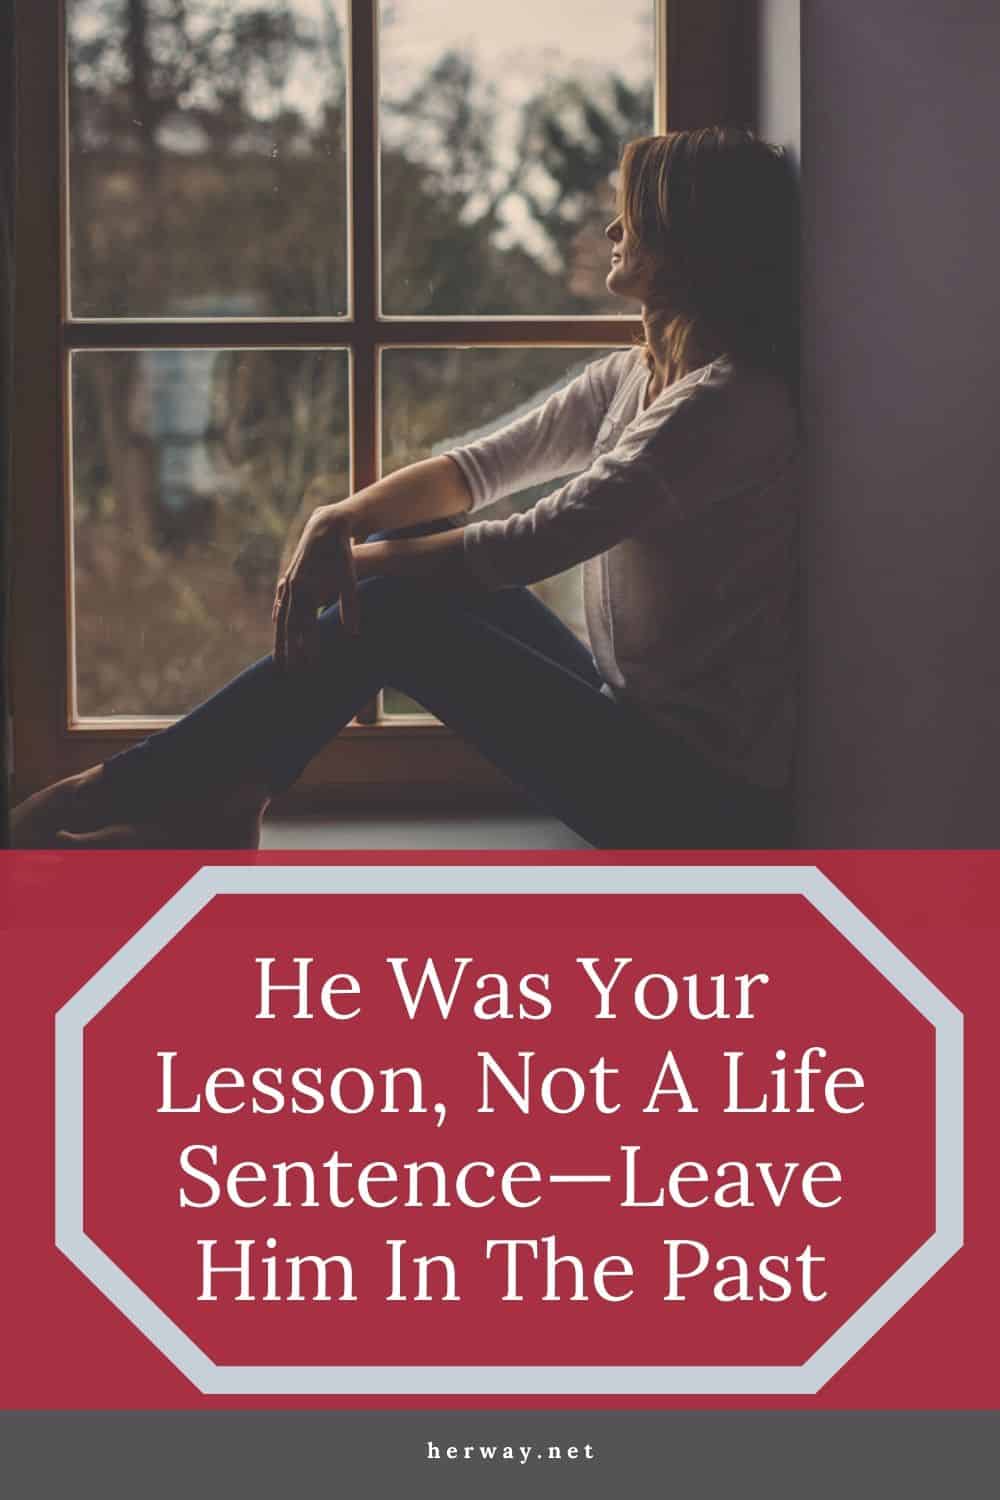 He Was Your Lesson, Not A Life Sentence—Leave Him In The Past